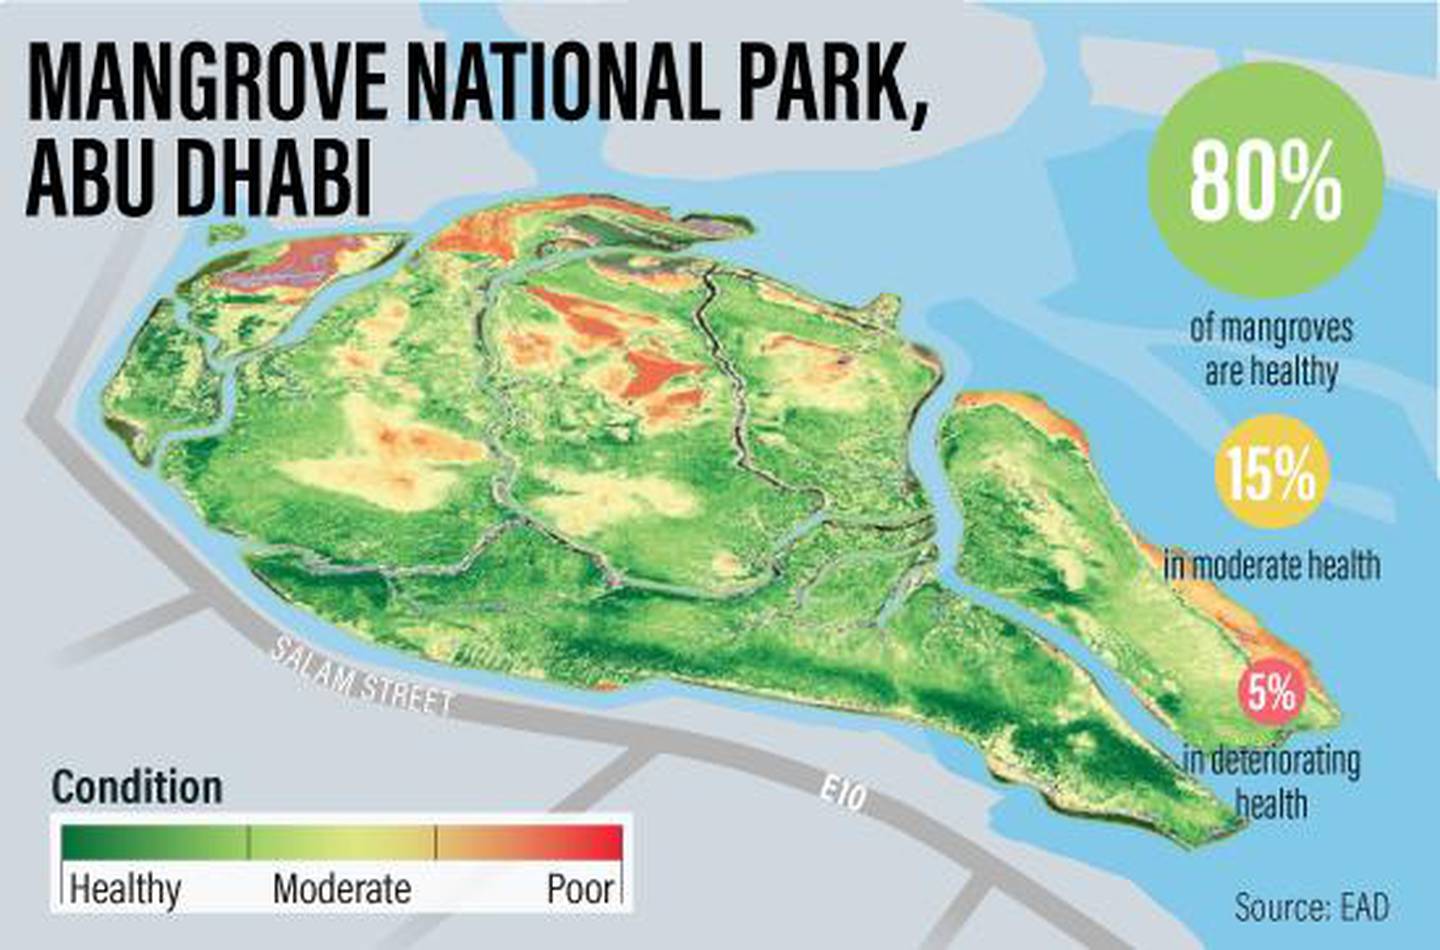 Satellite mapping found that 80 per cent of the emirate’s mangroves are healthy, while 15 per cent are in moderate condition and 5 per cent are in deteriorating health. Ramon Peñas / The National